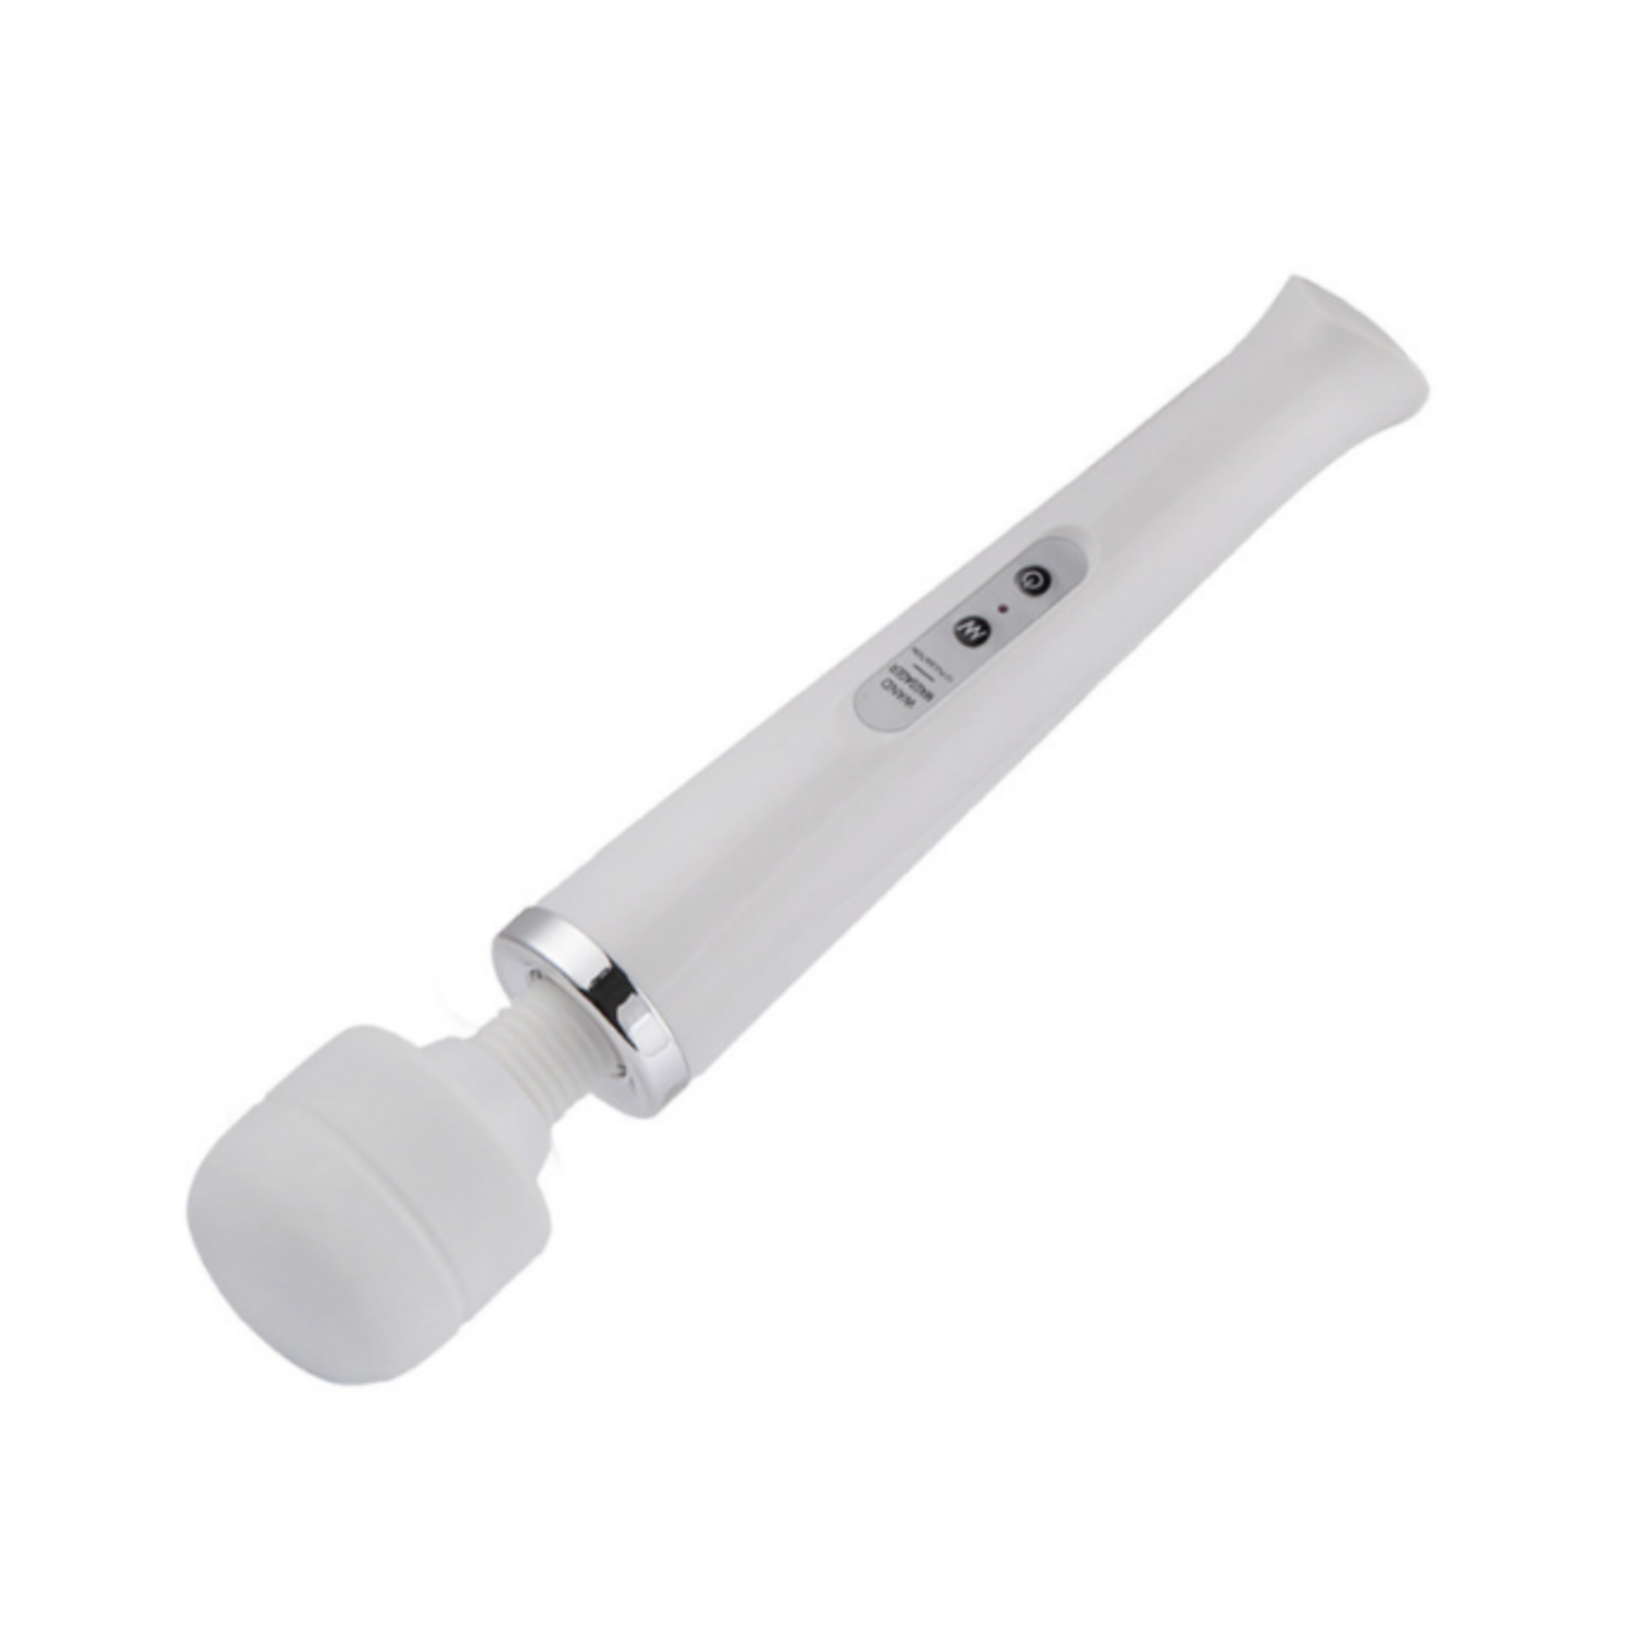 RECHARGEABLE SILICONE & ABS AV VIBRATOR MASSAGE WAND